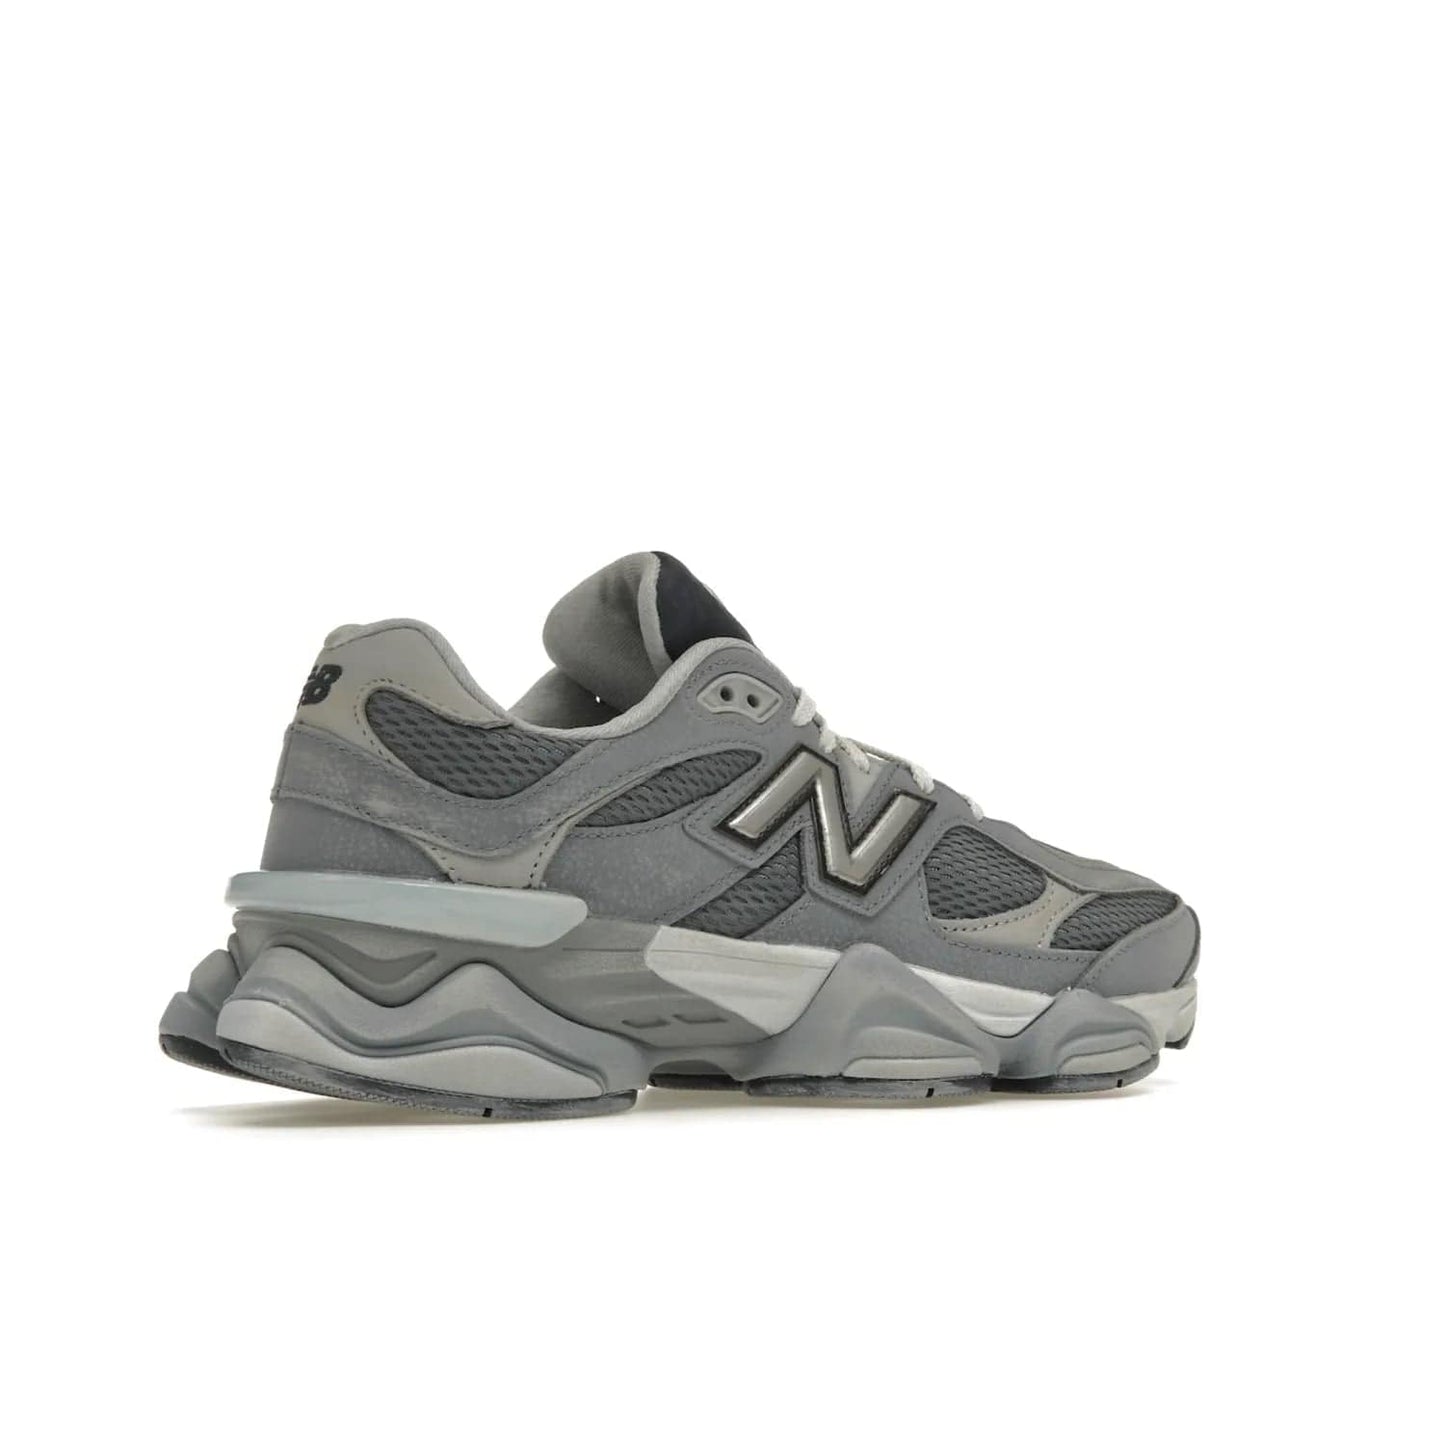 New Balance 9060 Grey Day (2023) - Image 34 - Only at www.BallersClubKickz.com - #
Sporty-meets-stylish in the New Balance 9060 Grey Day sneaker. Designed with Arctic Grey, Steel, and Silver Metallic, it offers an edgy but wearable look along with classic NB comfort and quality.